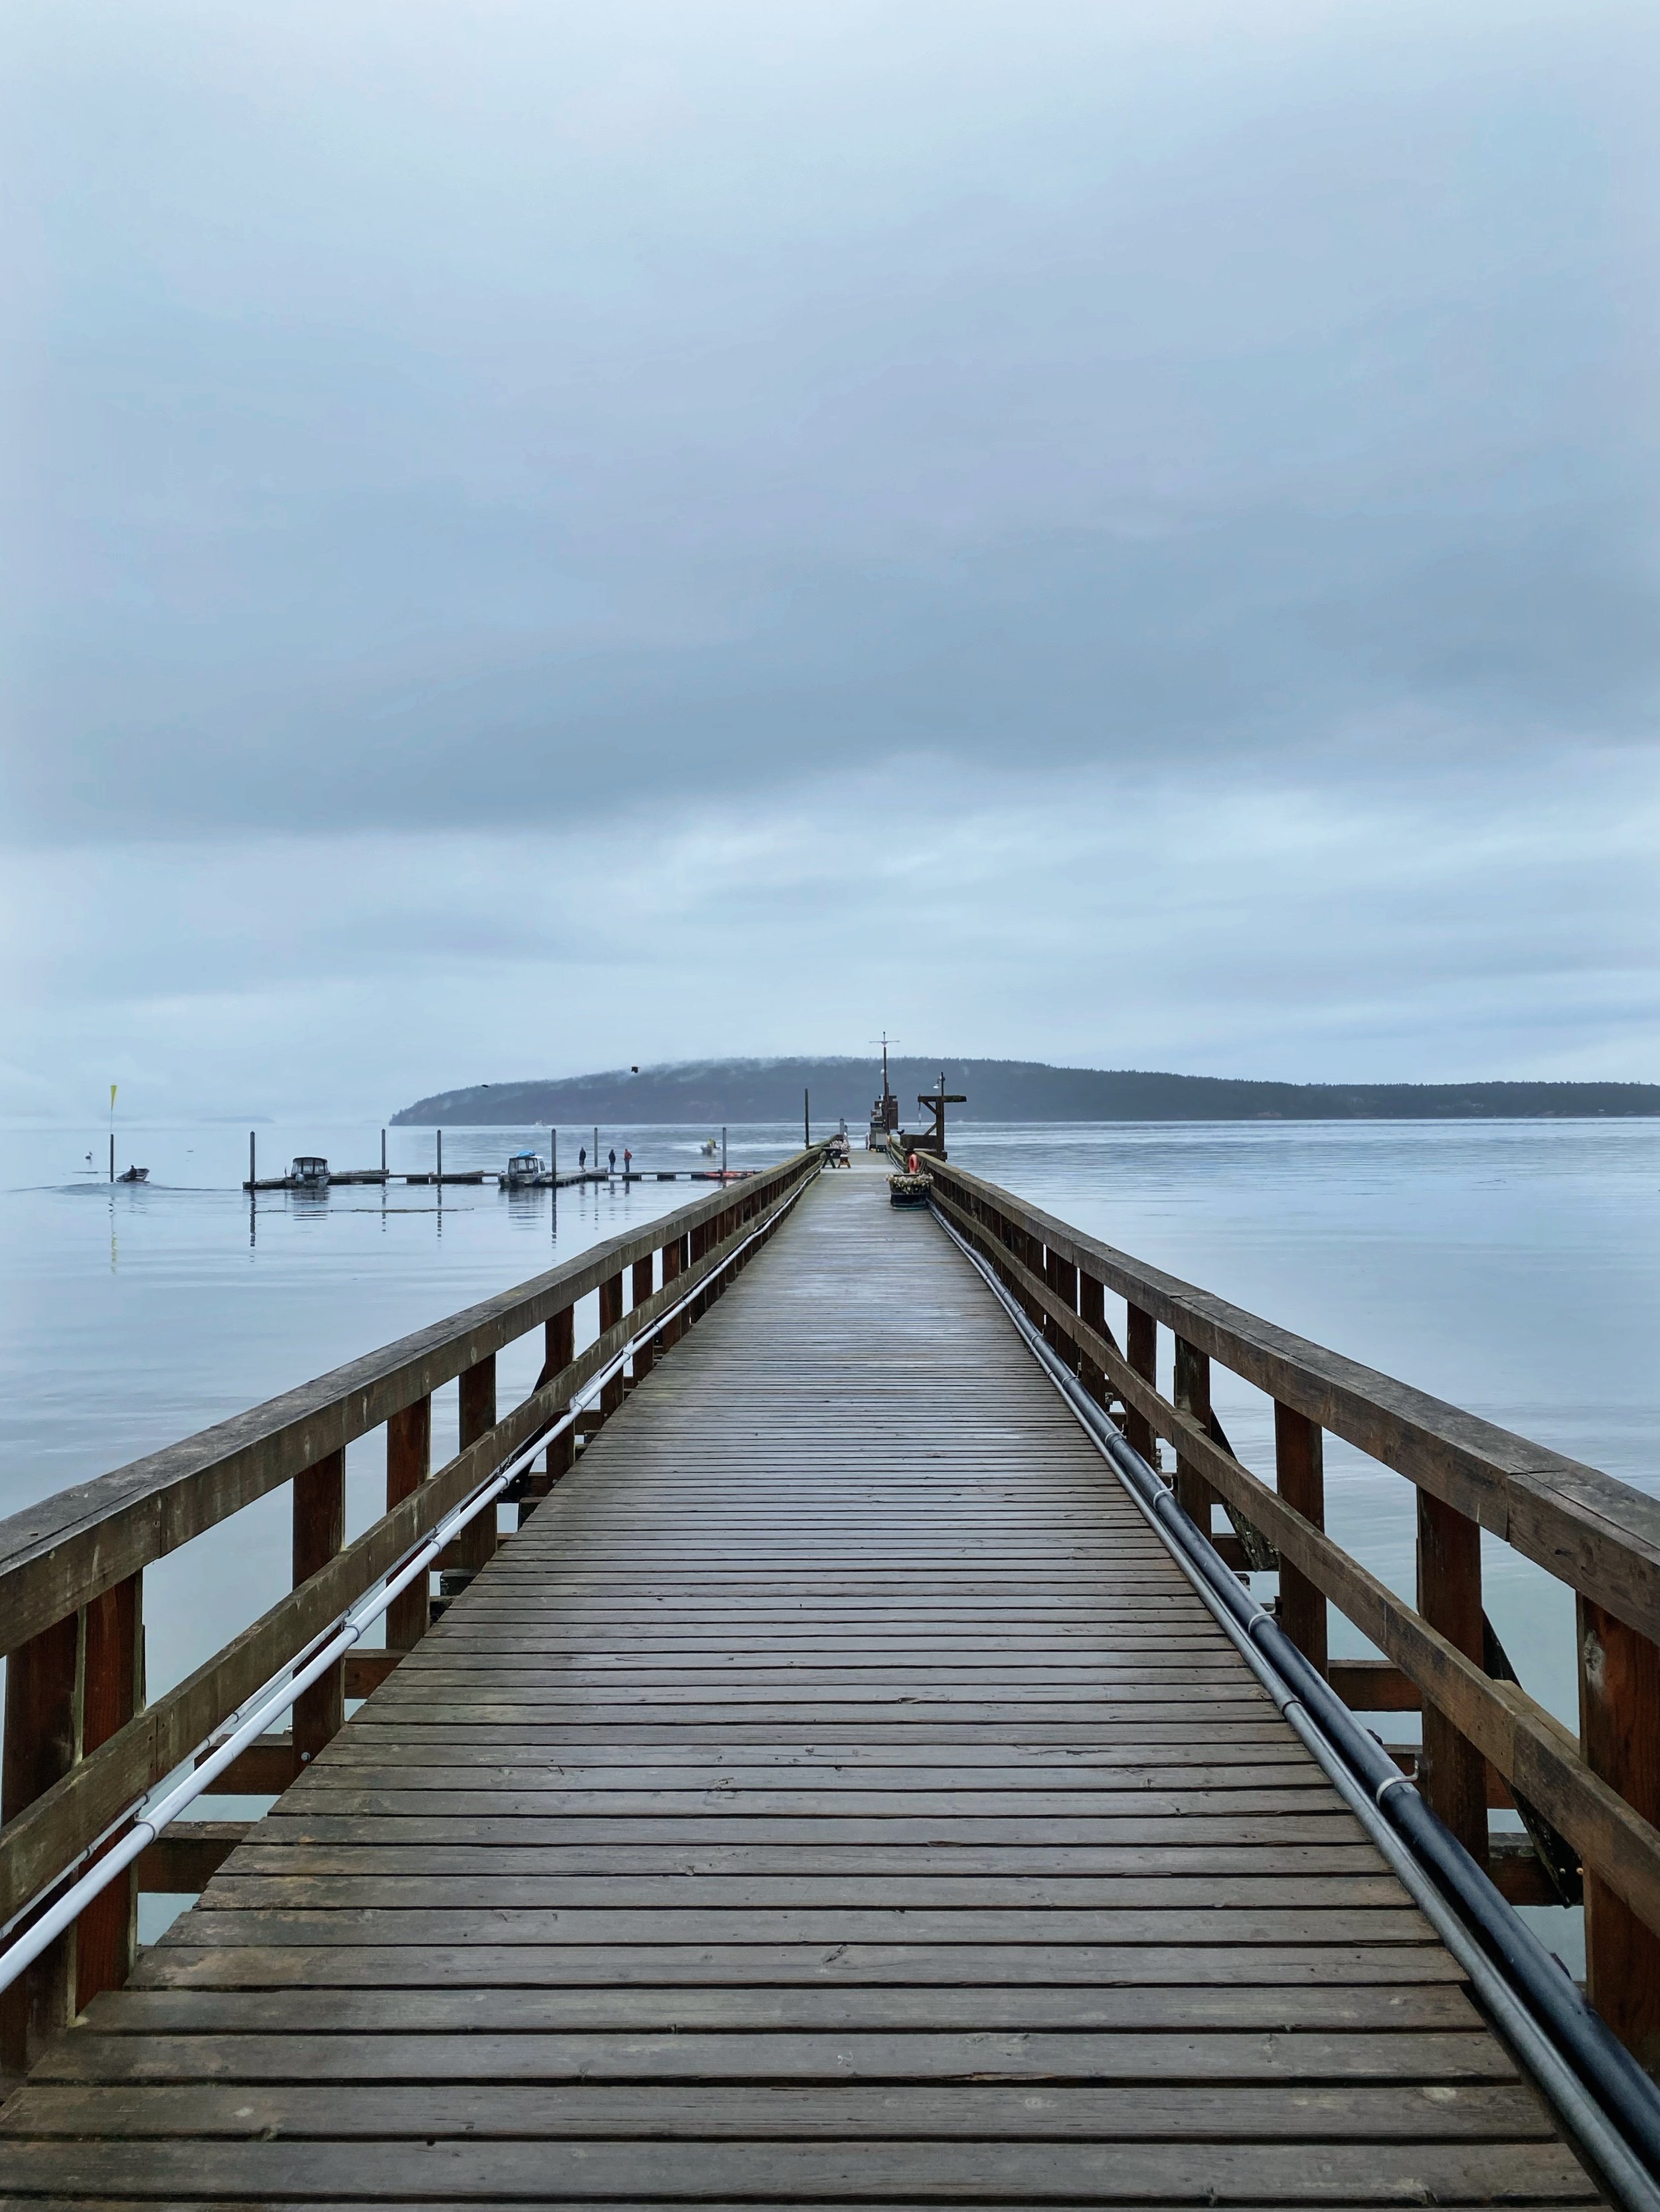 West Beach Resort Orcas Island Boat Dock and Launch